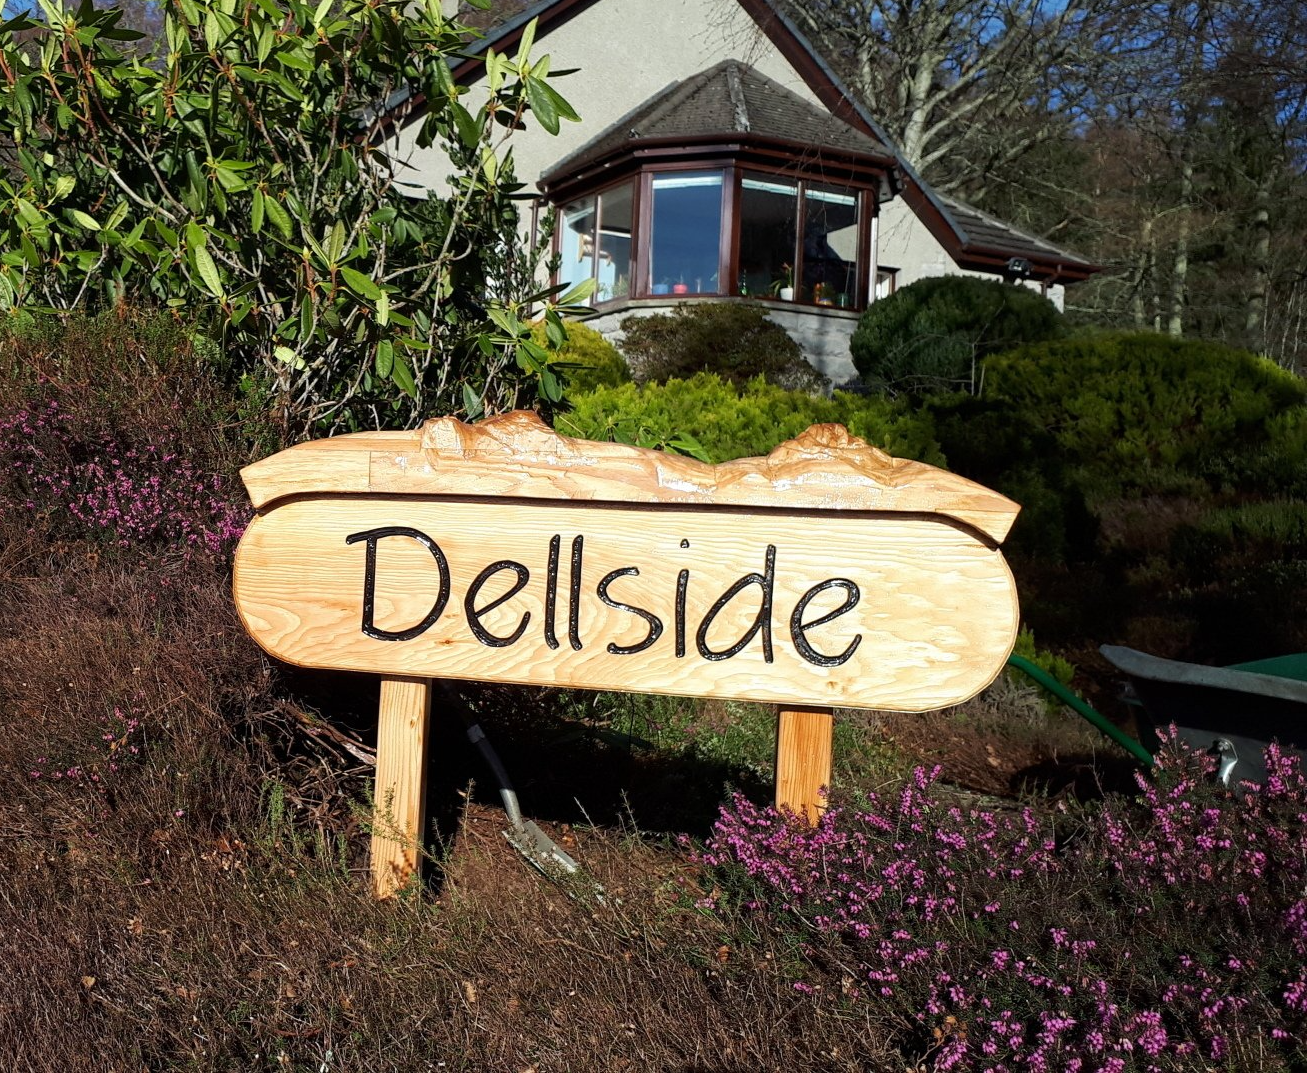 High impact 3D Scottish house signs